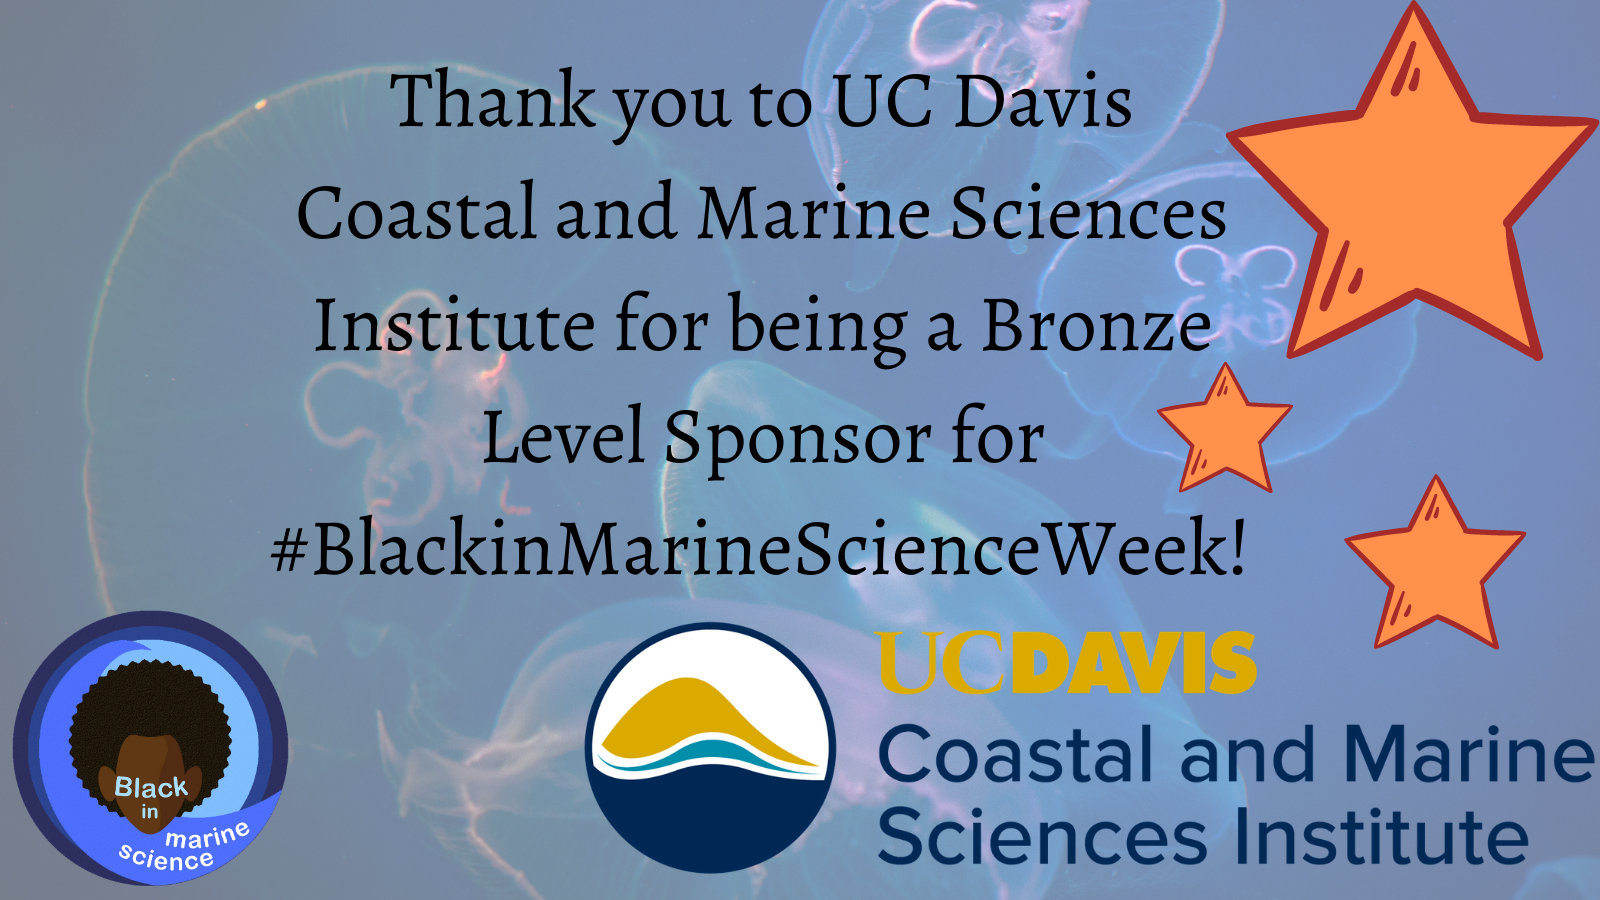 Thank you to UC Davis' Coastal & Marine Science Institute for being a Bronze Level Sponsor for Black in Marine Science Week